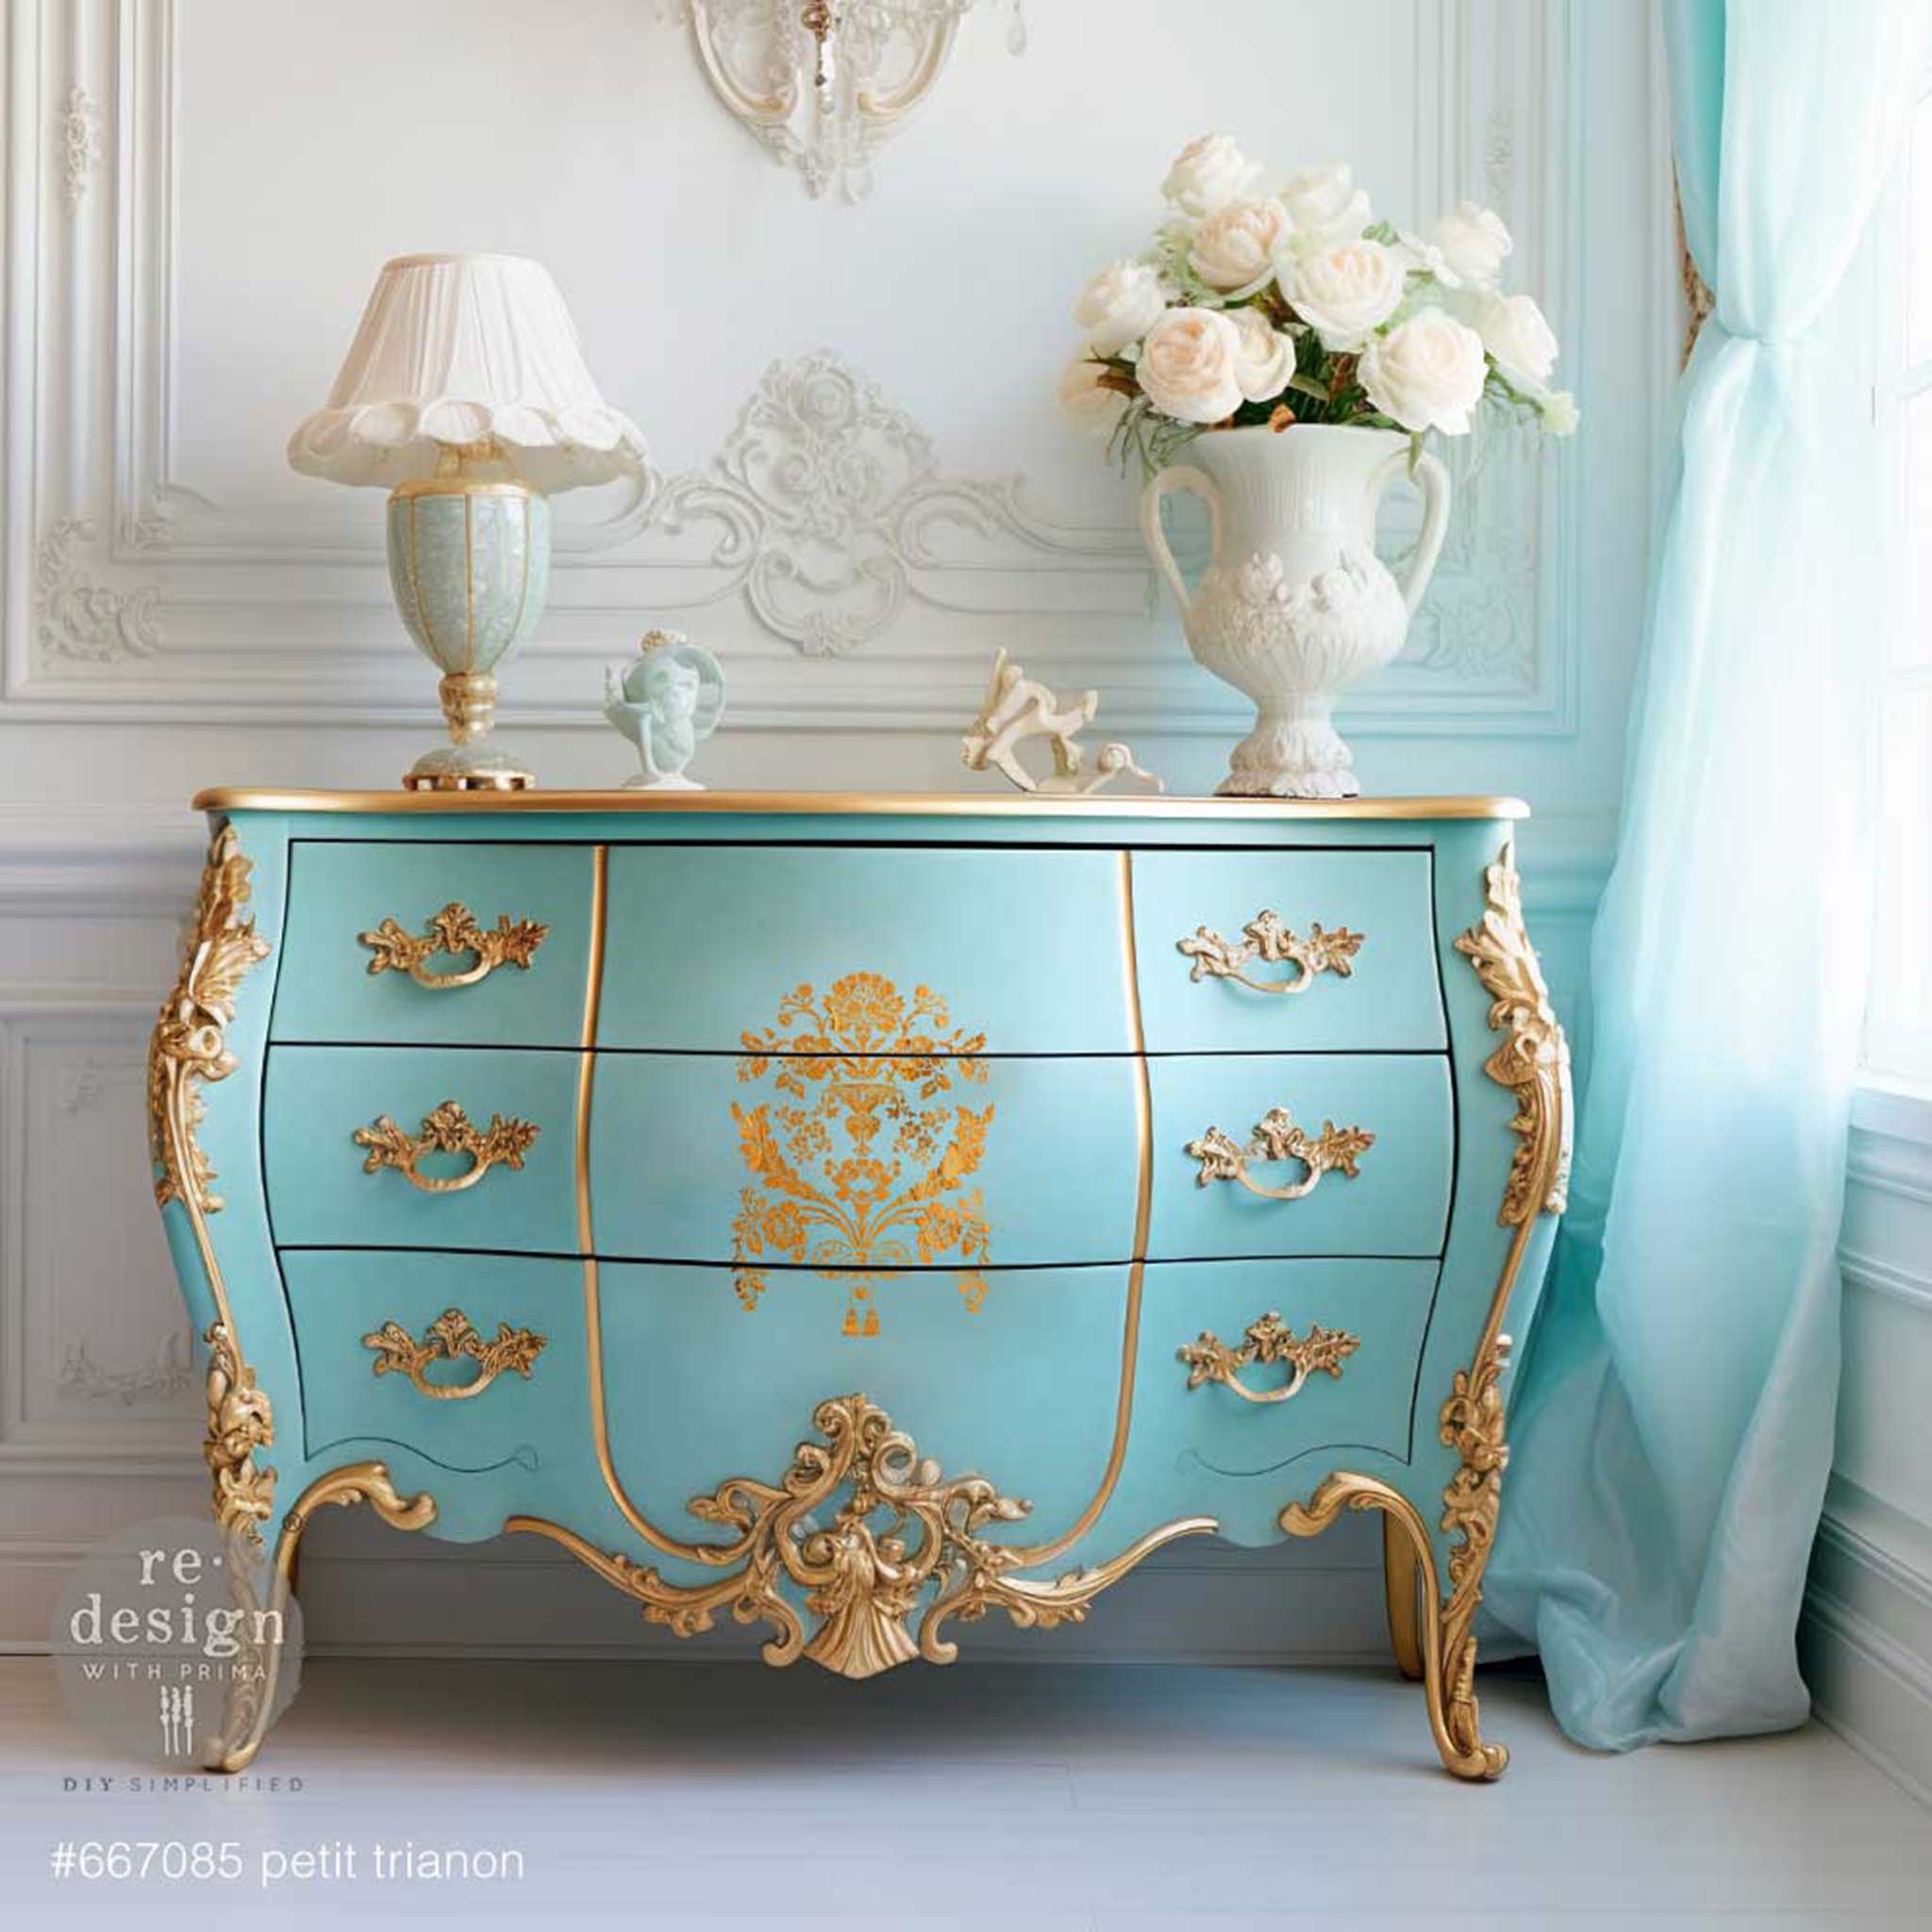 A vintage Bombay dresser is painted light teal with gold accents and features ReDesign with Prima's Petit Trianon stencil in gold in the center of the drawers.